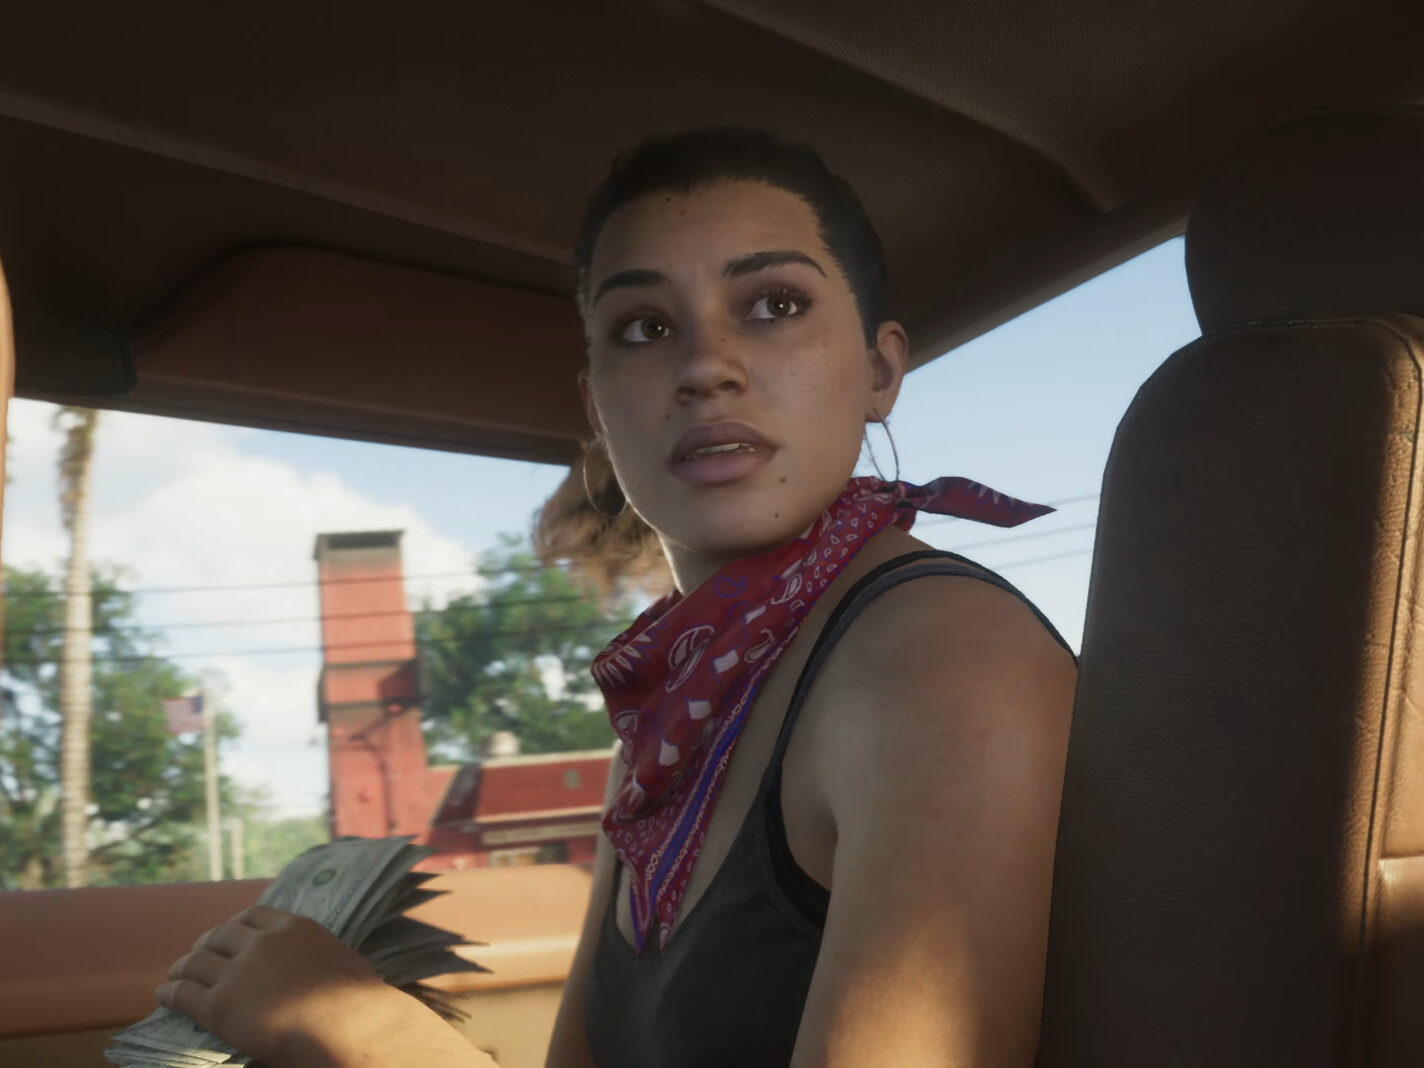 Grand Theft Auto VI leak followed by an official trailer with a twist: A  release date of 2025